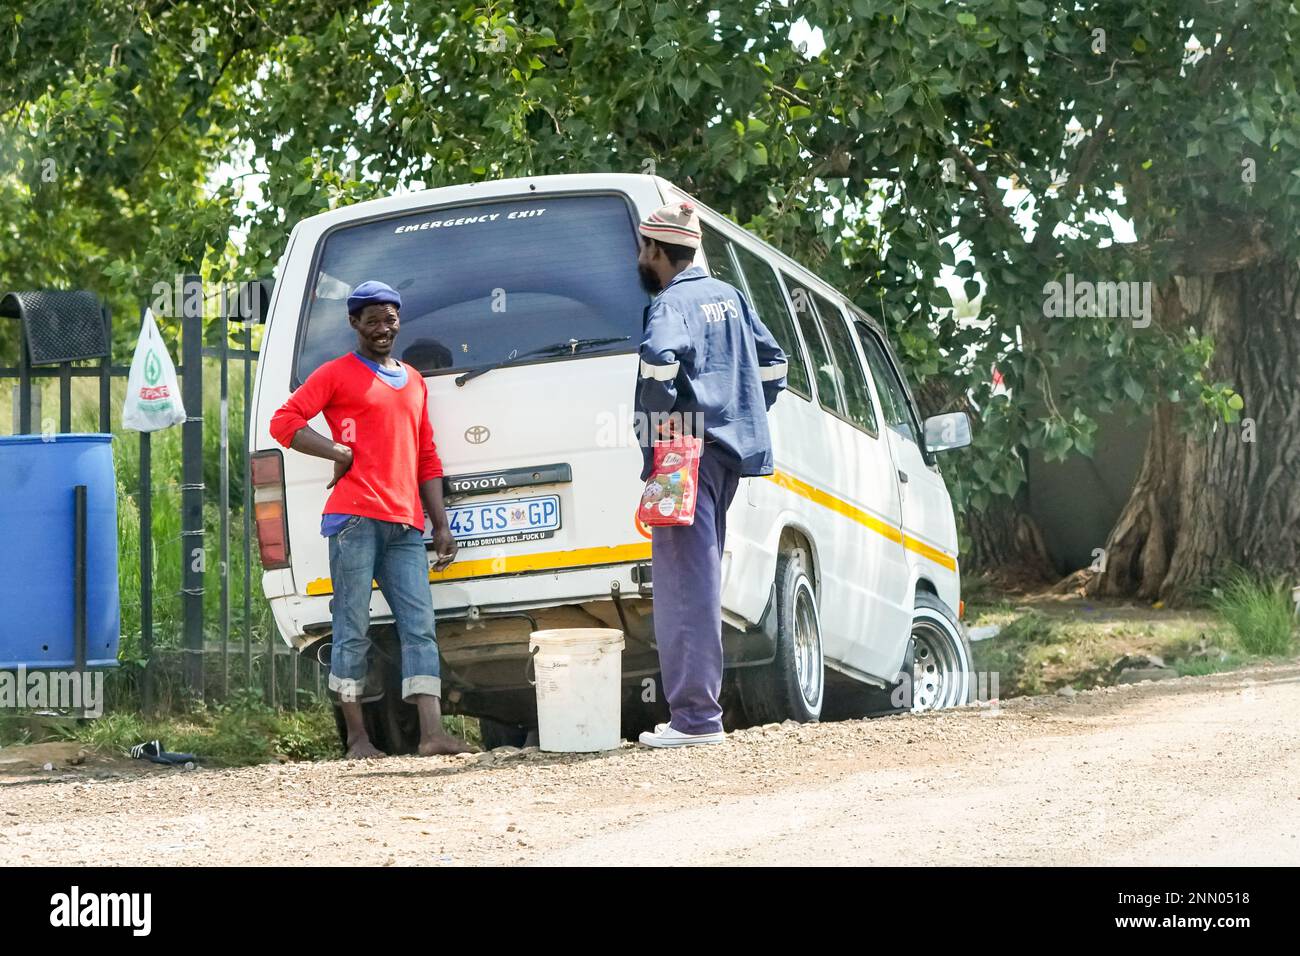 daily life in Africa, two African men friends having a chat against a taxi on the side of the road in South Africa, authentic lifestyle street photo Stock Photo